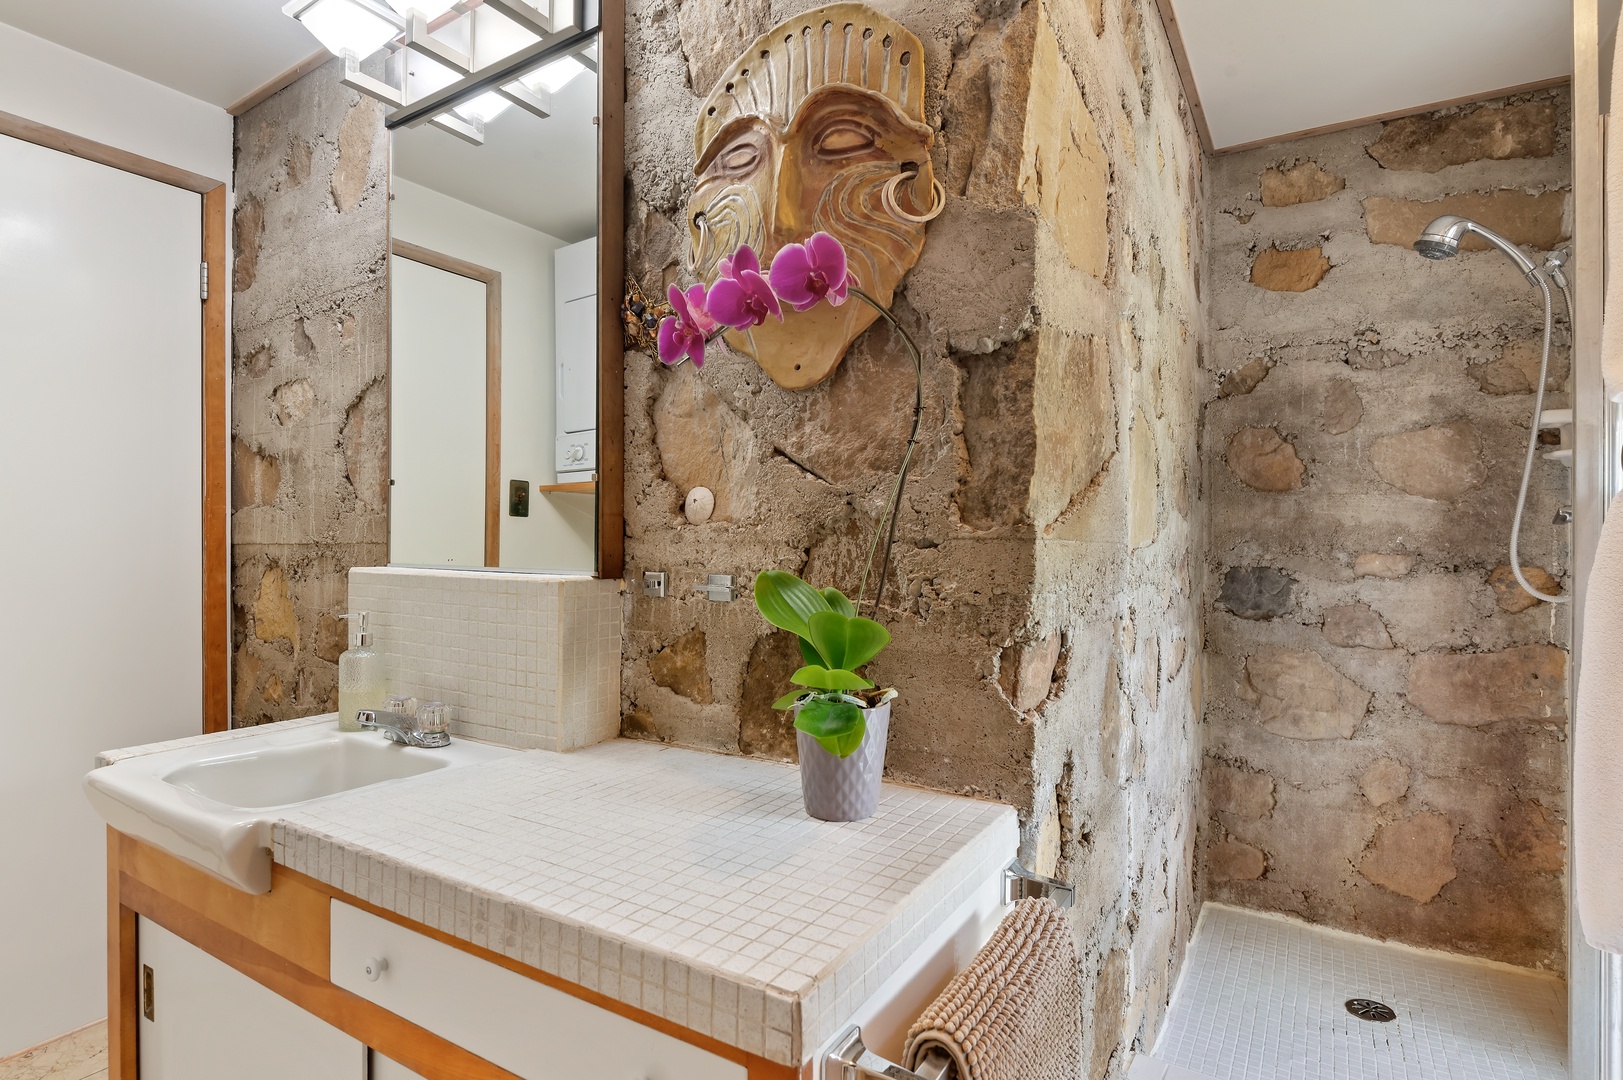 First Floor Bathroom with natural stone details, ample counter space, and Shower